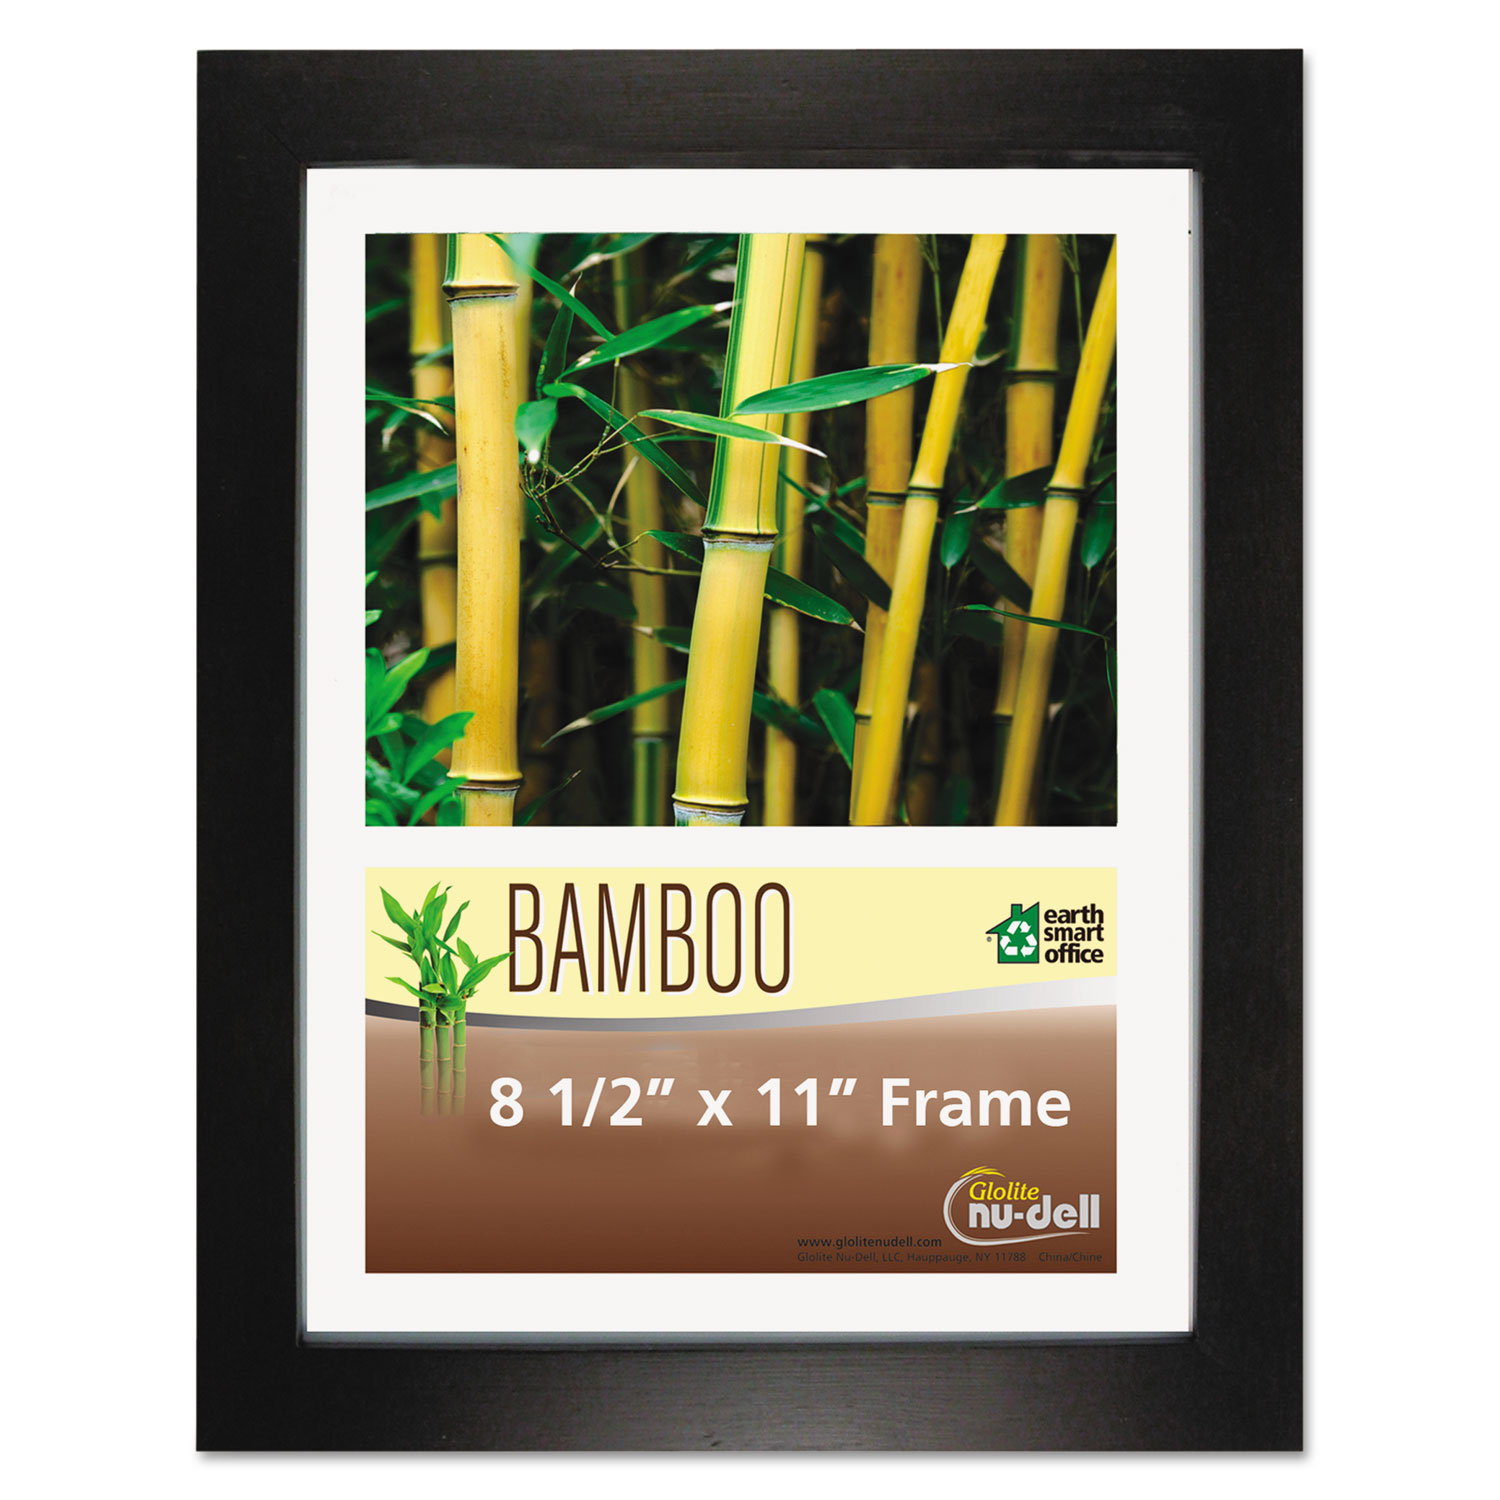  NuDell 14185 Bamboo Frame, 8 1/2 x 11, Black (NUD14185) 